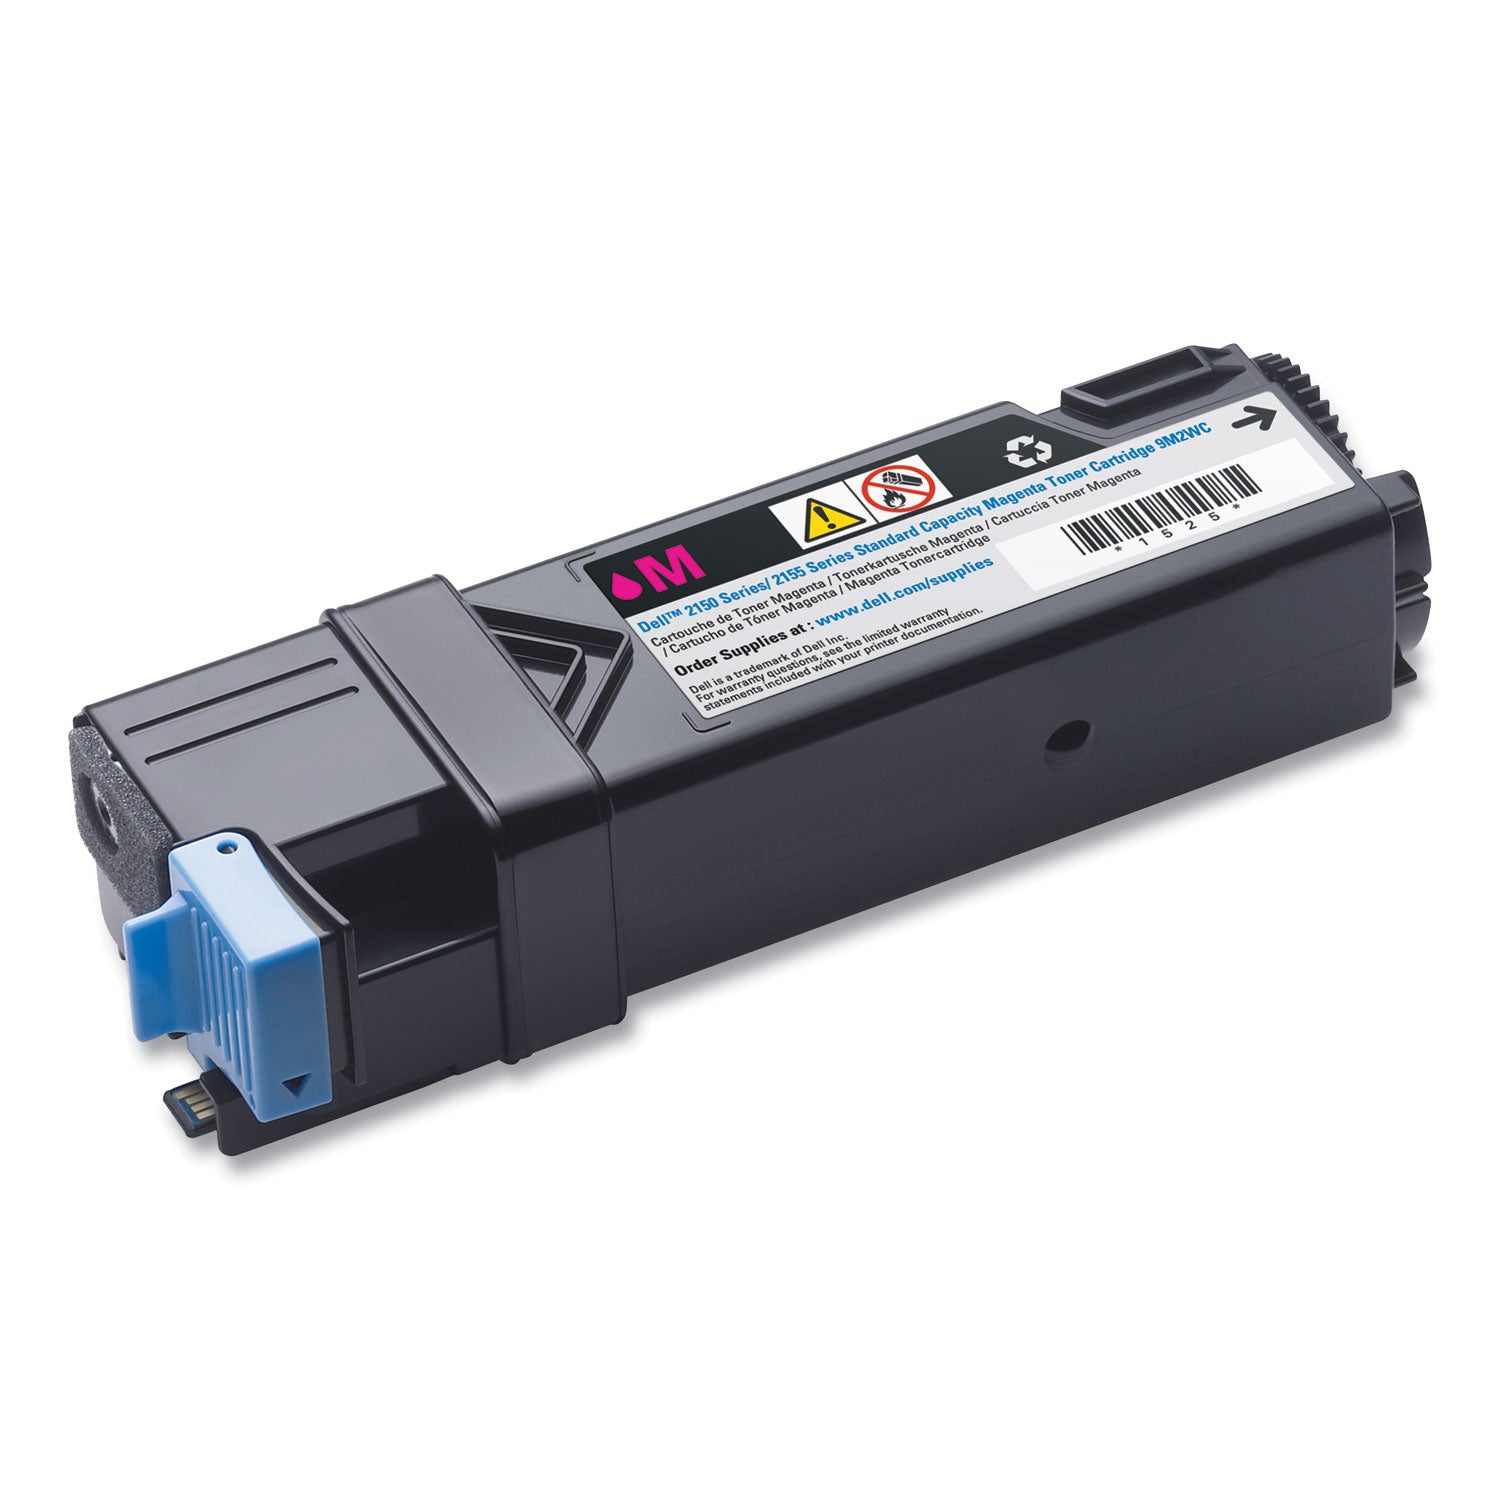 9m2wc-toner-1200-page-yield-magenta_dll9m2wc - 1